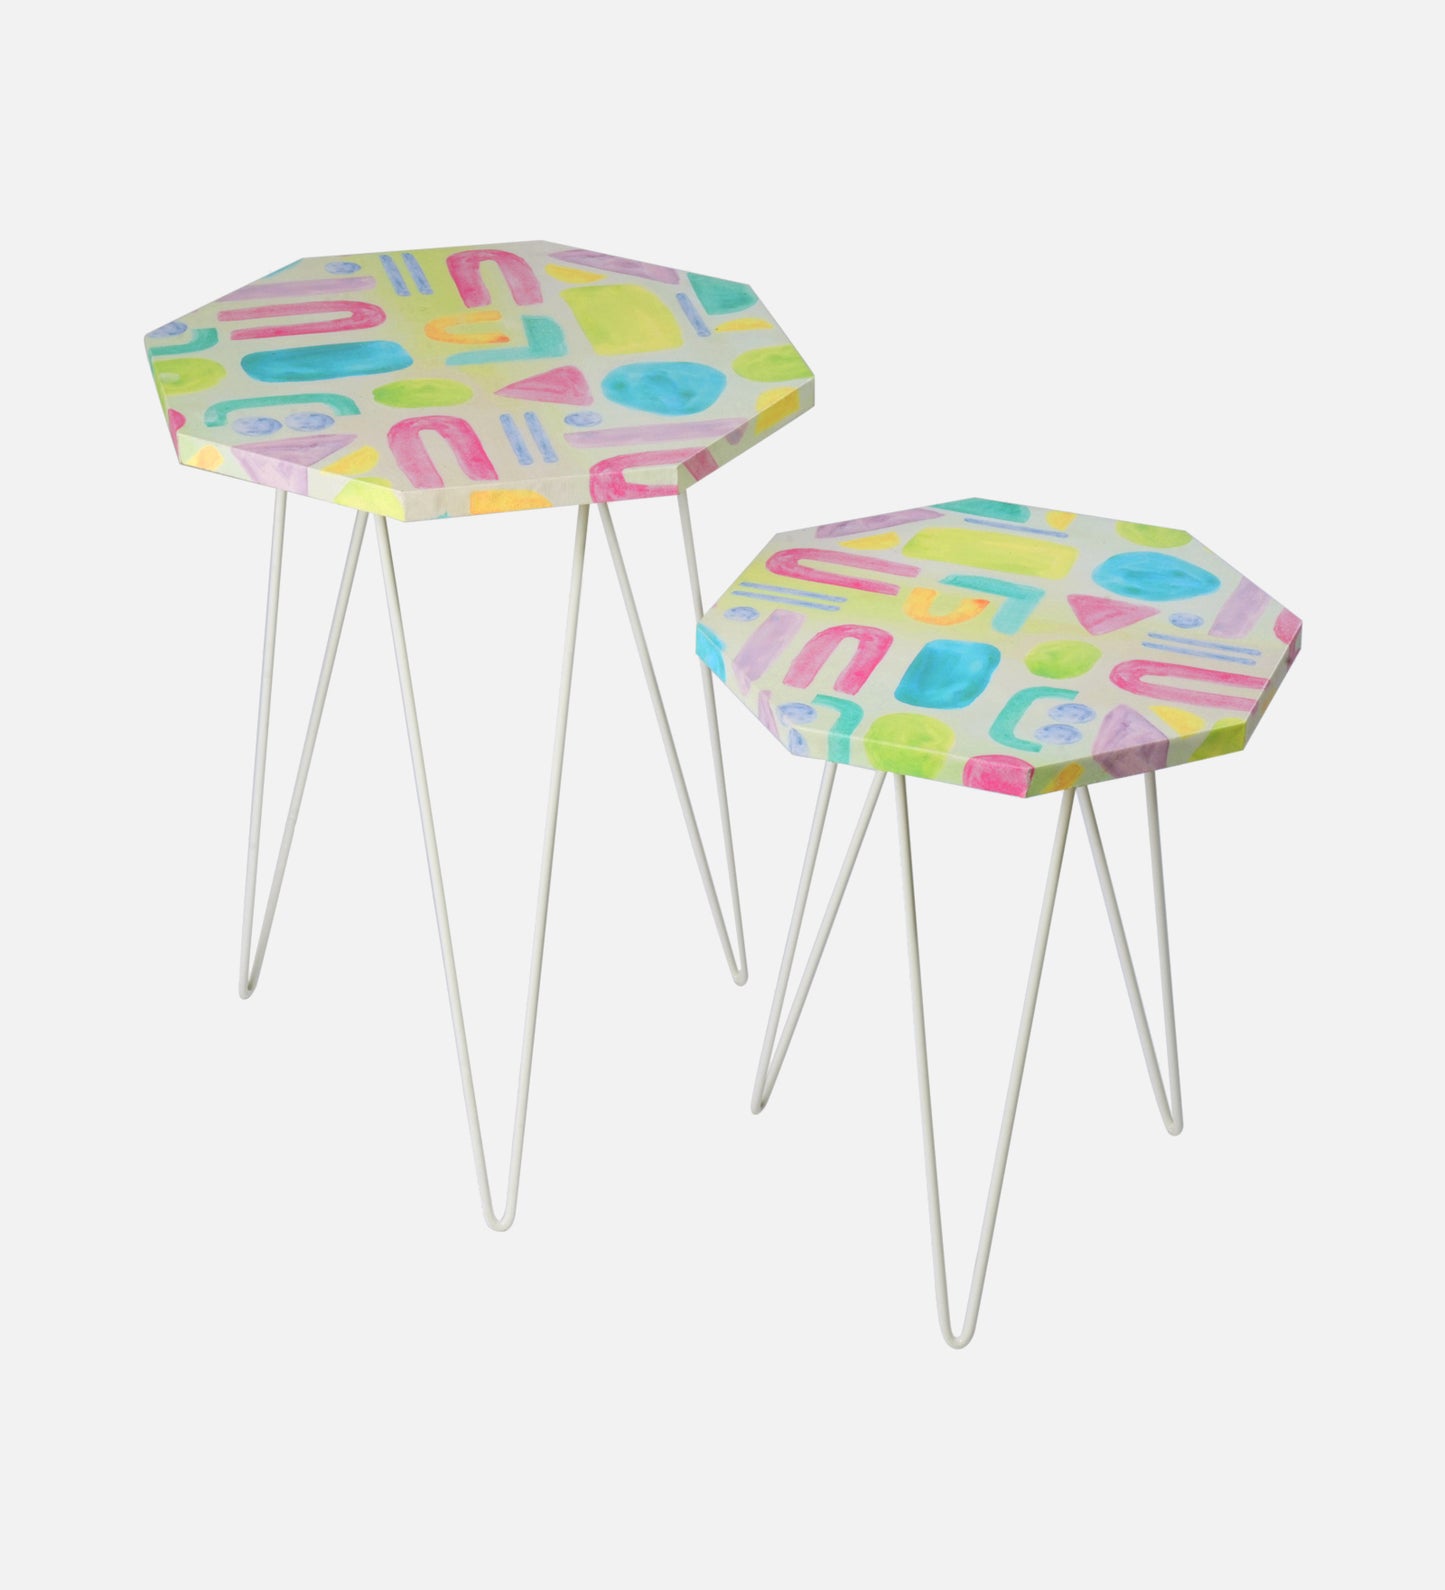 Tiny Doodles Octagon Nesting Tables with Hairpin Legs, Side Tables, Wooden Tables, Living Room Decor by A Tiny Mistake